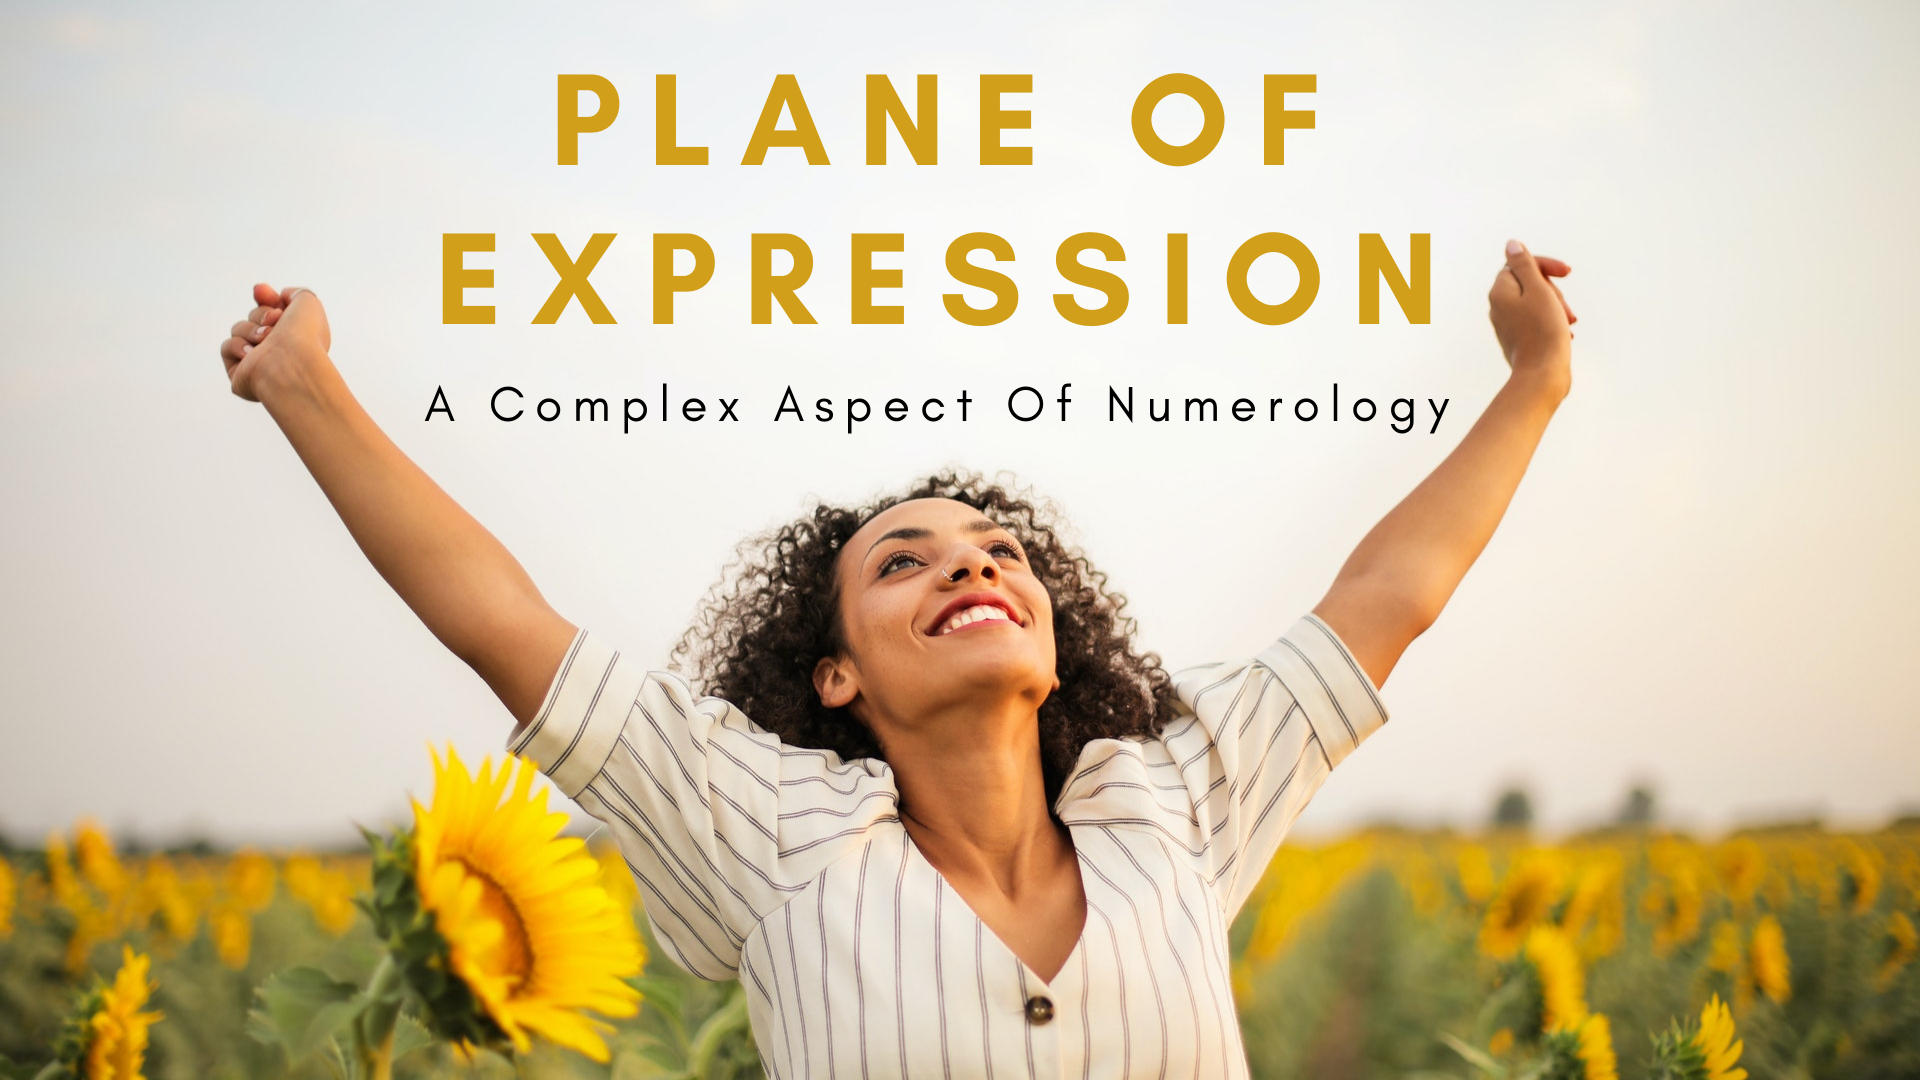 Plane Of Expression - A Complex Aspect Of Numerology